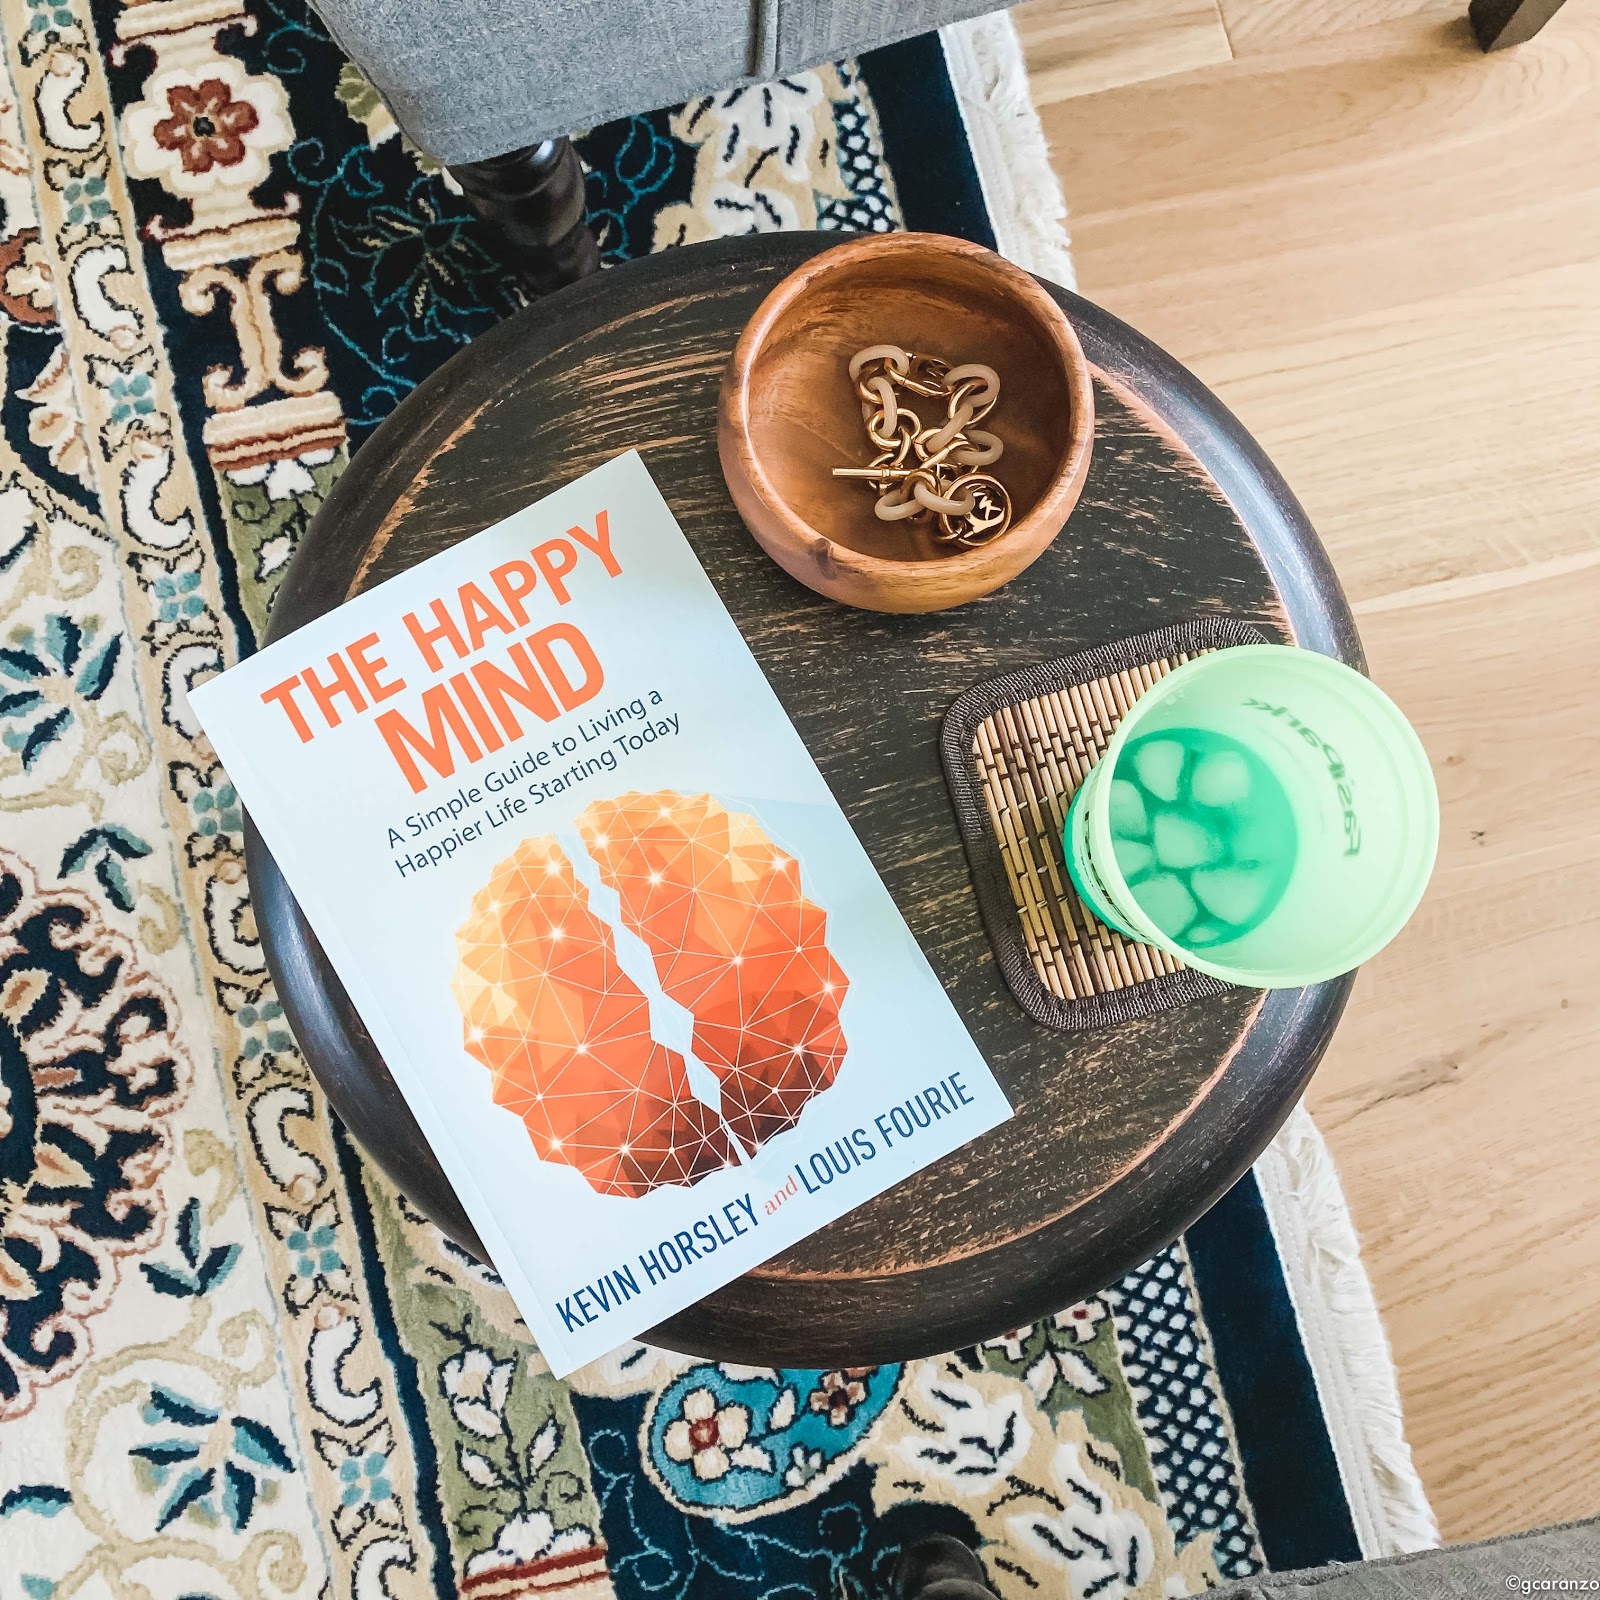 The Happy Mind Book Review